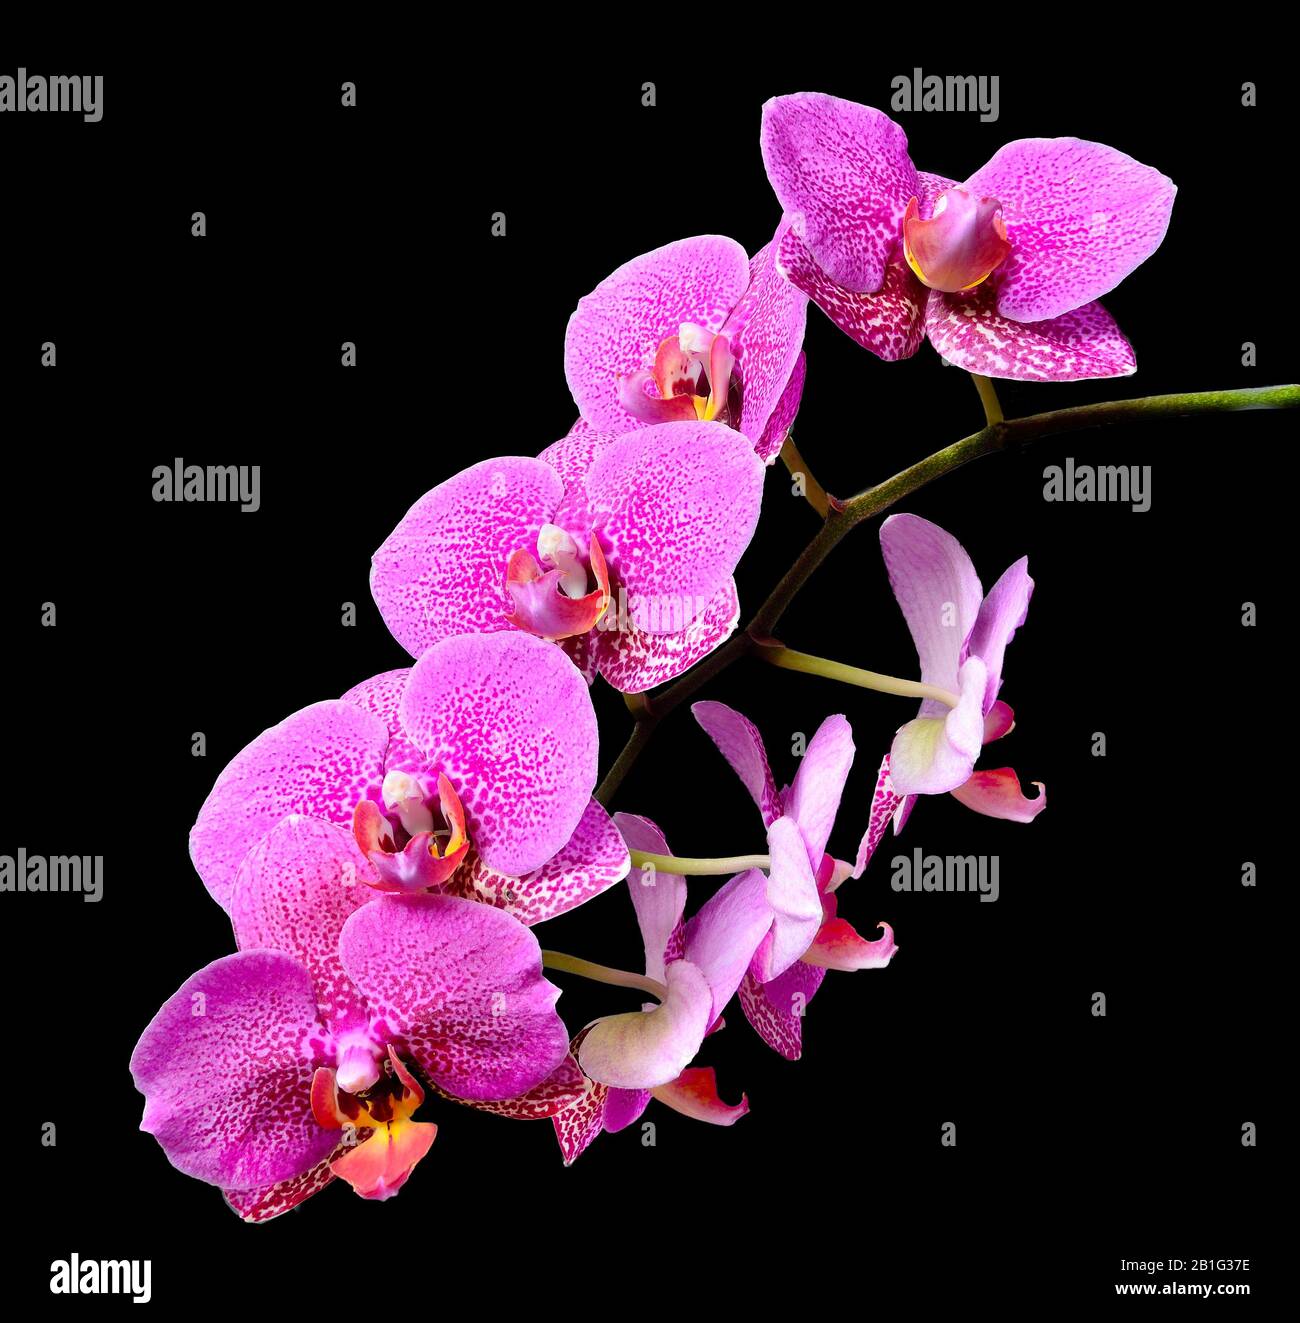 Branch of mauve pink delicate elegant tropical flowers Orchids or Phaleonopsis close up isolated on black background Stock Photo